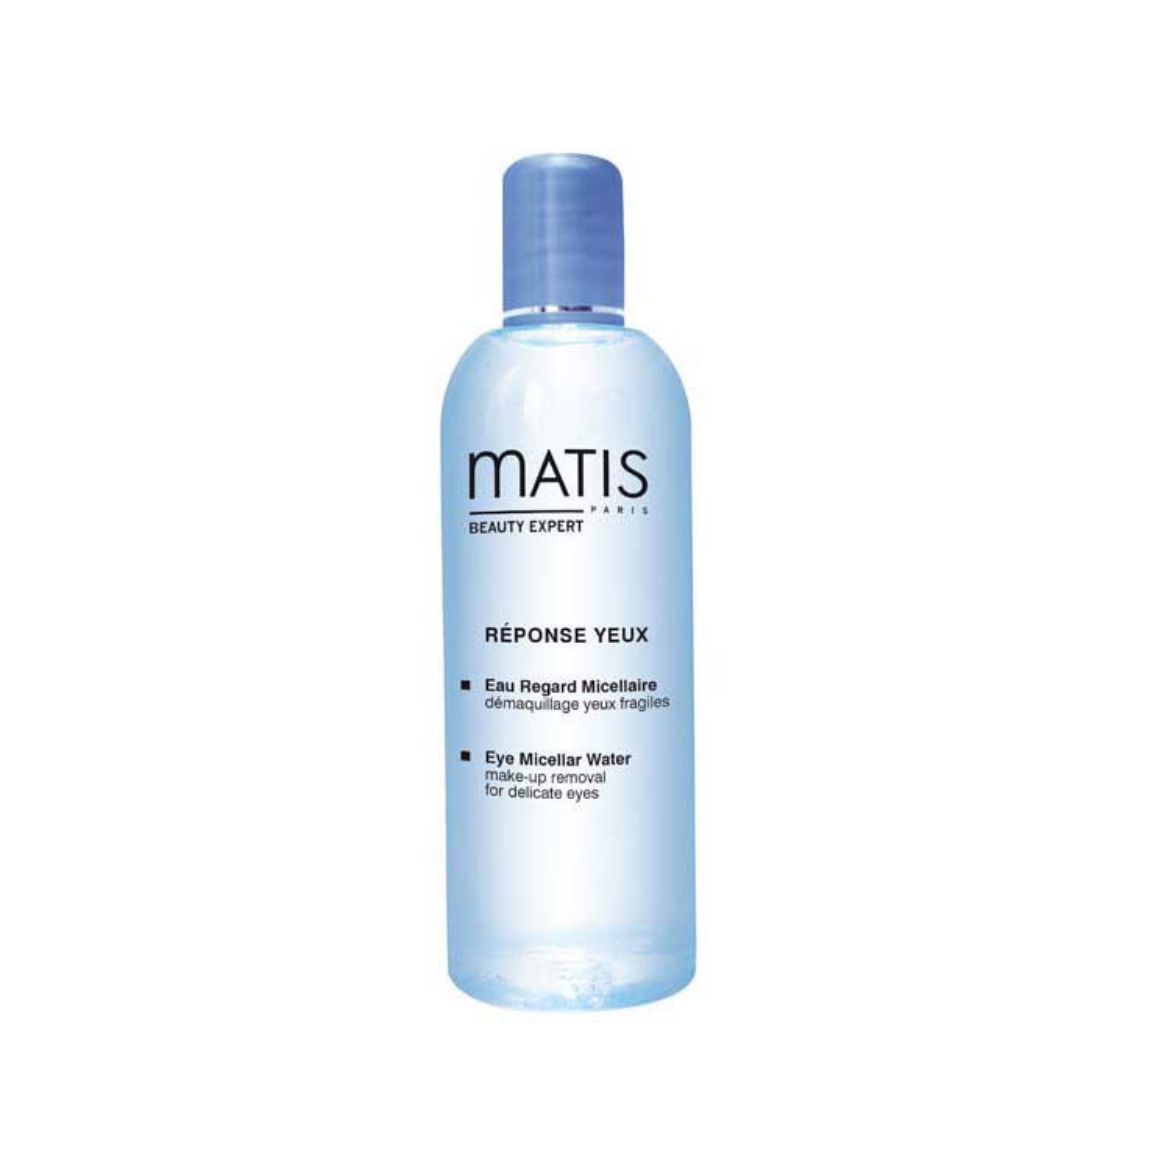 Image of Matis Eau Regard Micellaire Démaquillage Yeux (150ml)